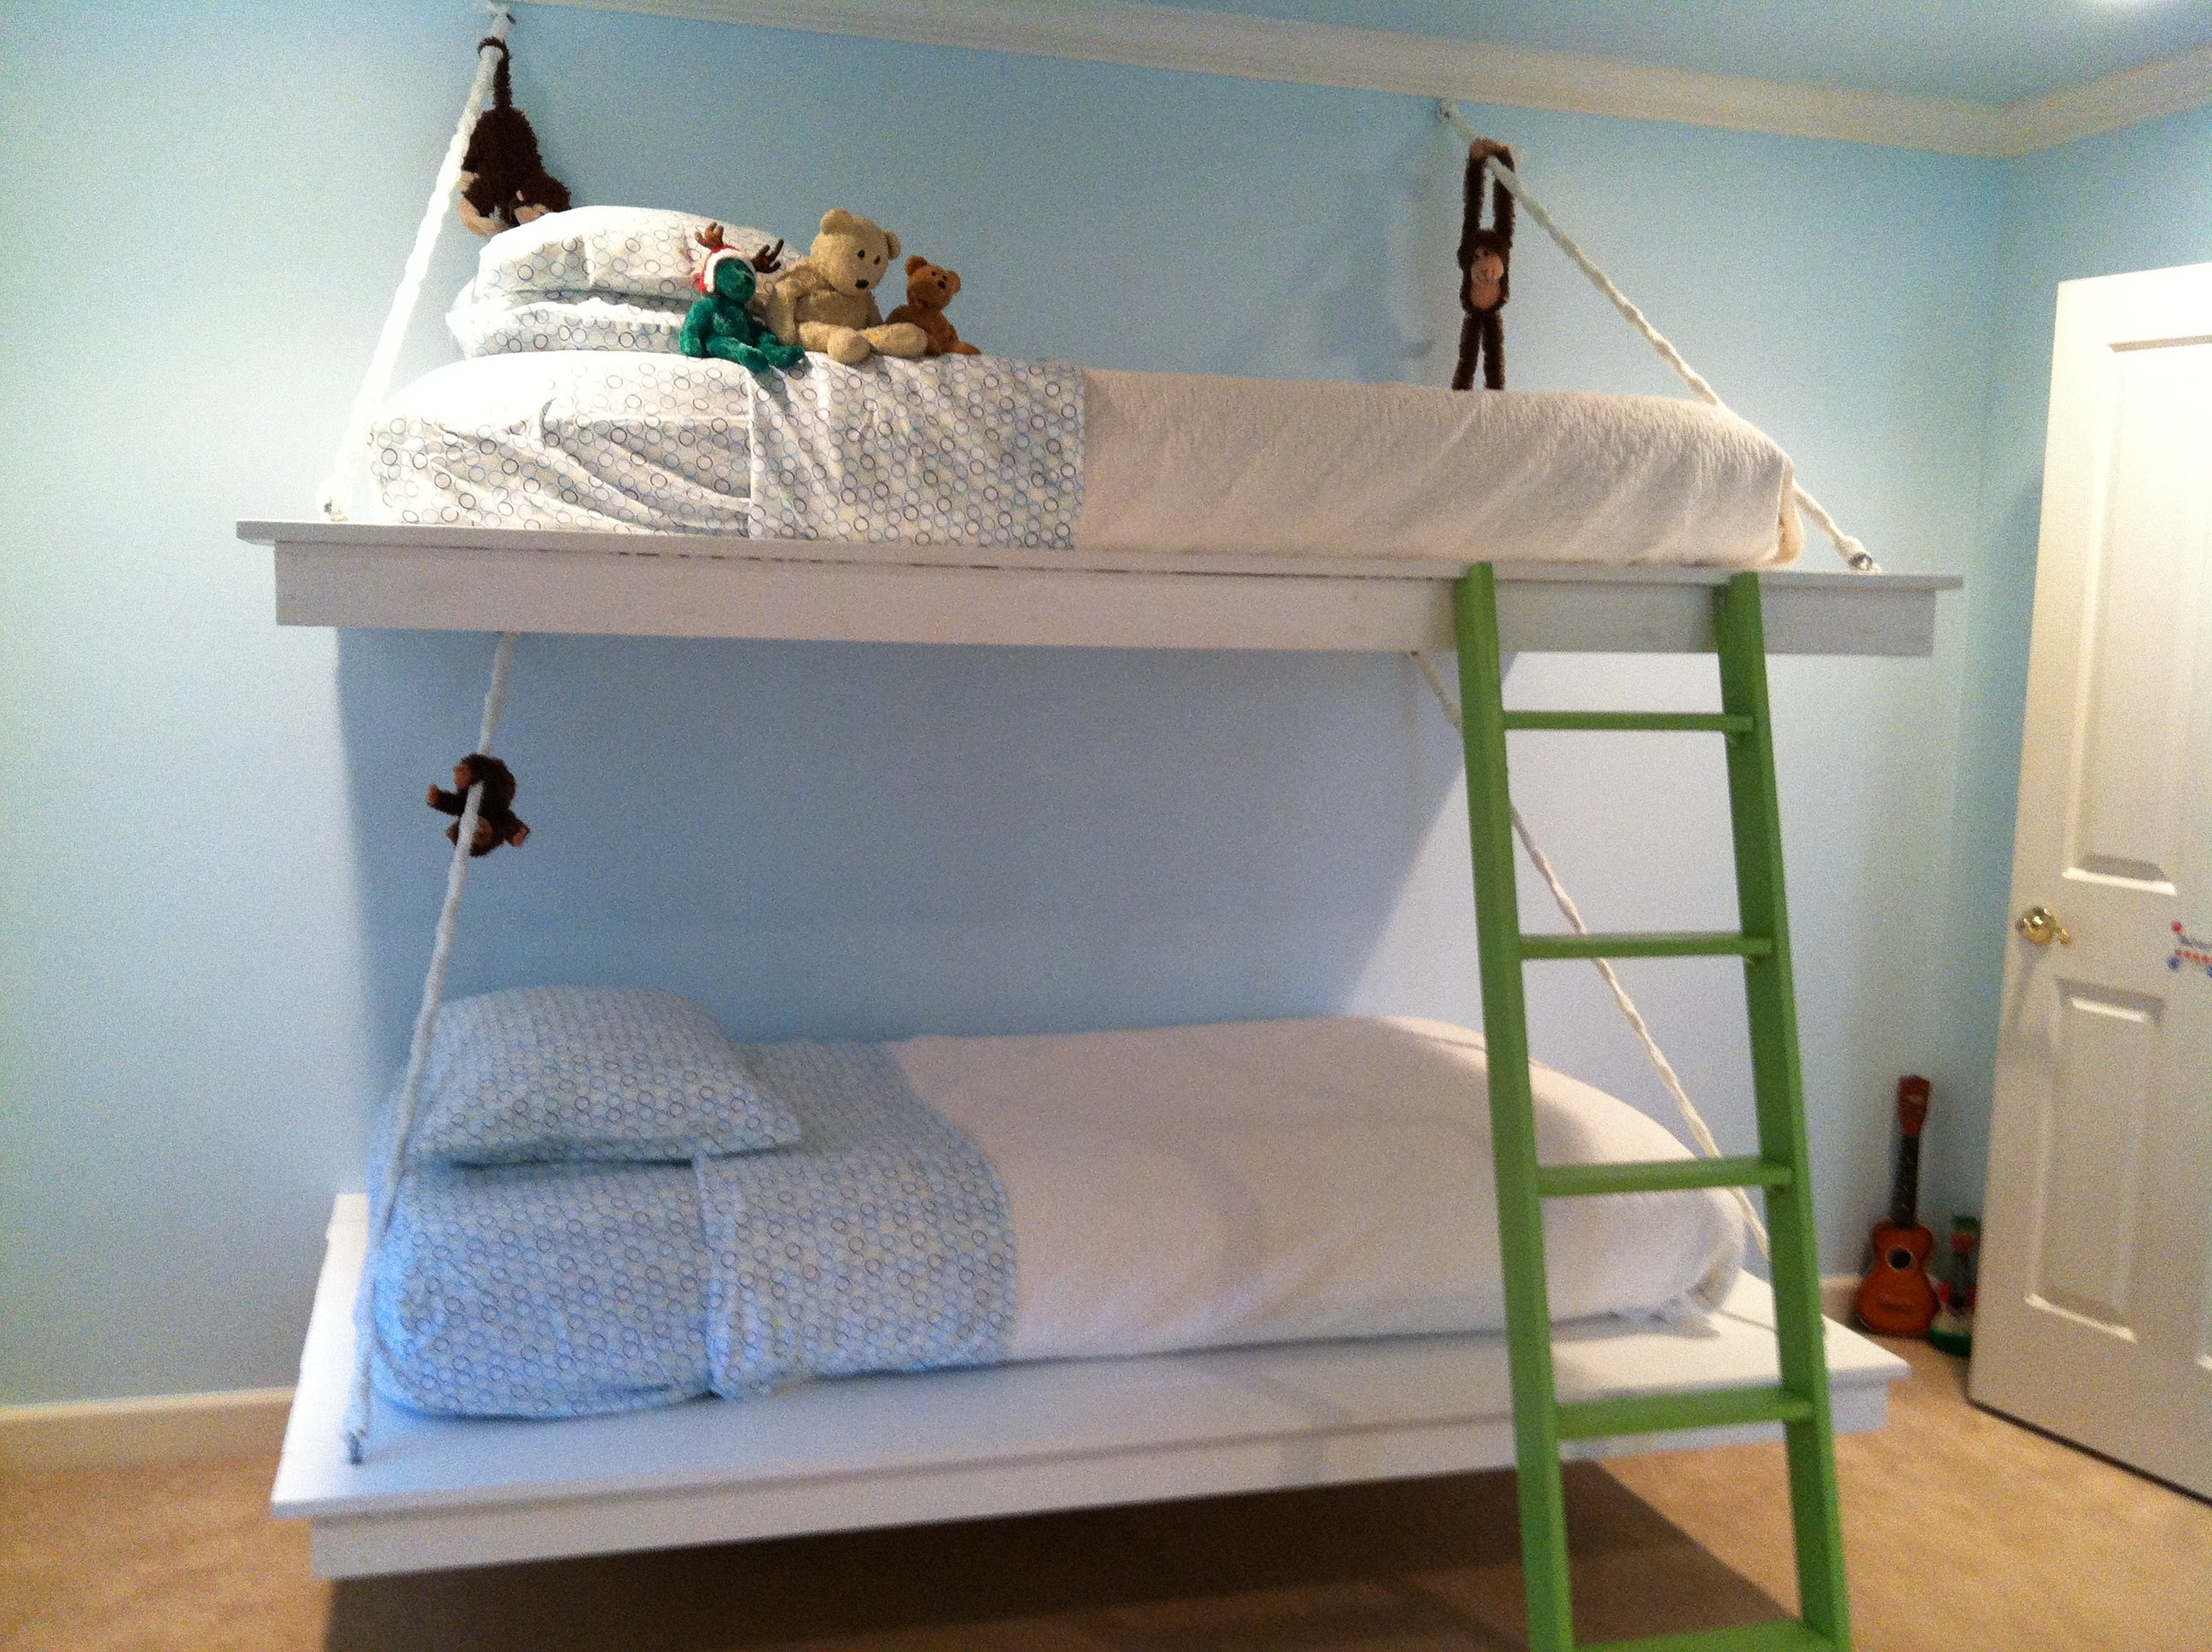 Hanging Bunk Beds Ana White, Diy Rope Ladder For Bunk Bed